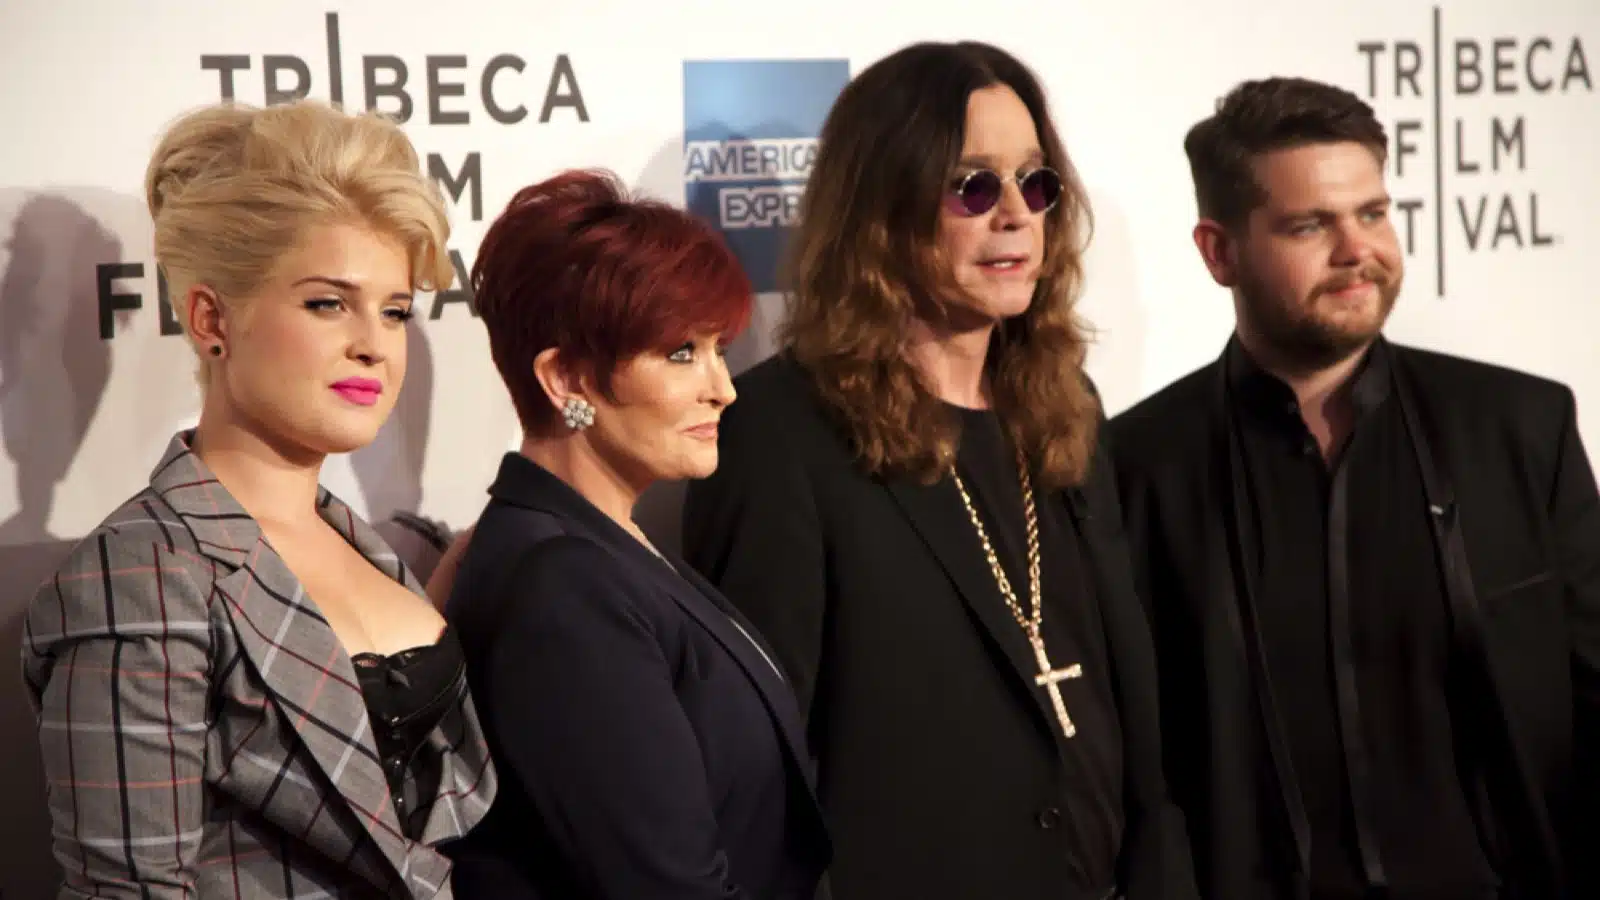 NEW YORK CITY - APRIL 24: The Osbourne clan, Kelly, Sharon, Ozzy and Jack (l-r), attend the premiere of the documentary "God Bless Ozzy Osbourne" at the Tribeca Film Festival on April 24, 2011 in New York City, NY